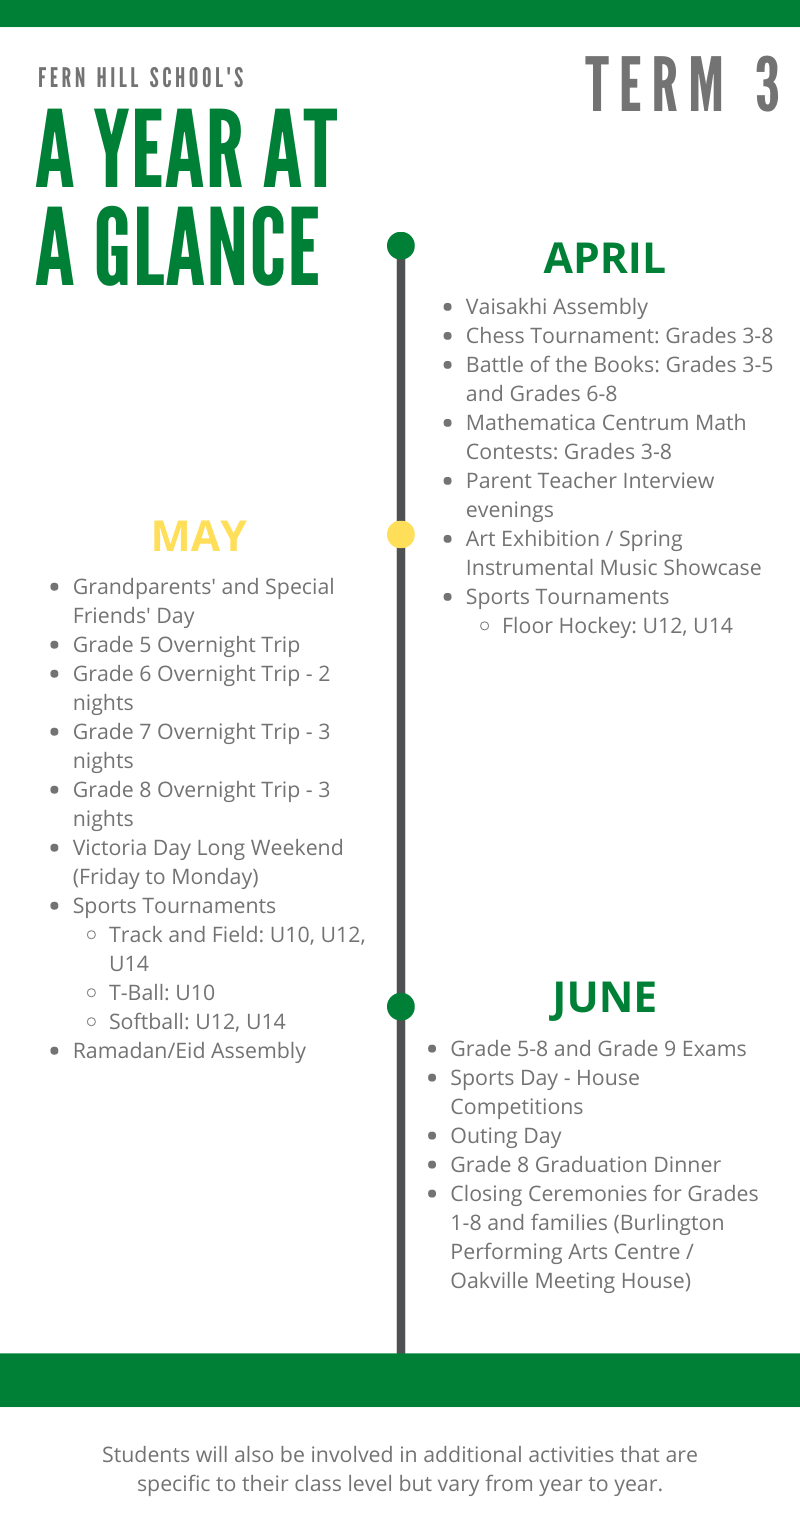 Year At A Glance - Term 3